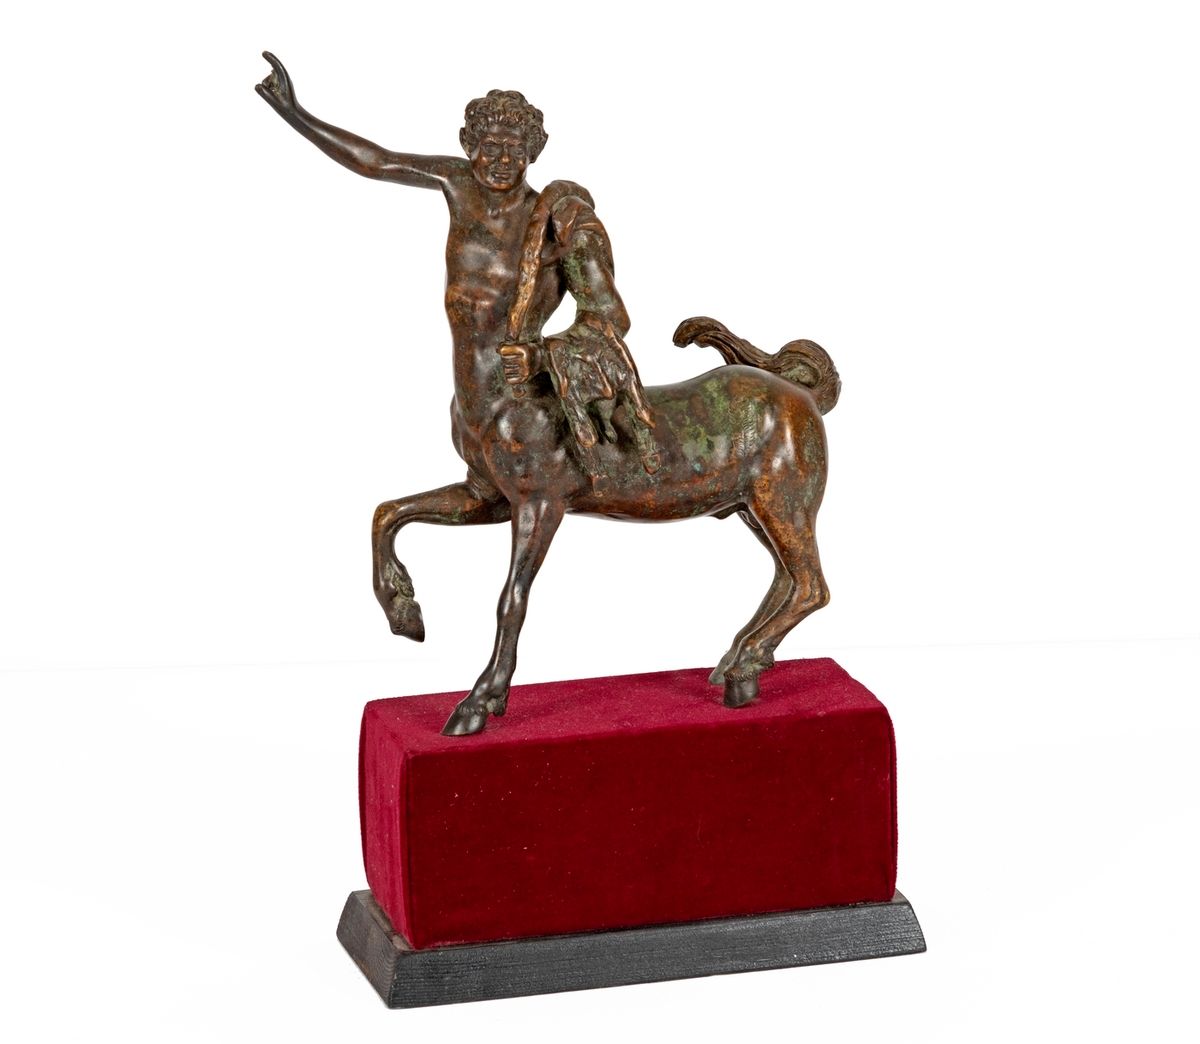 Null Young Centaur
Bronze patina
Italian work, probably 19th century
After one o&hellip;